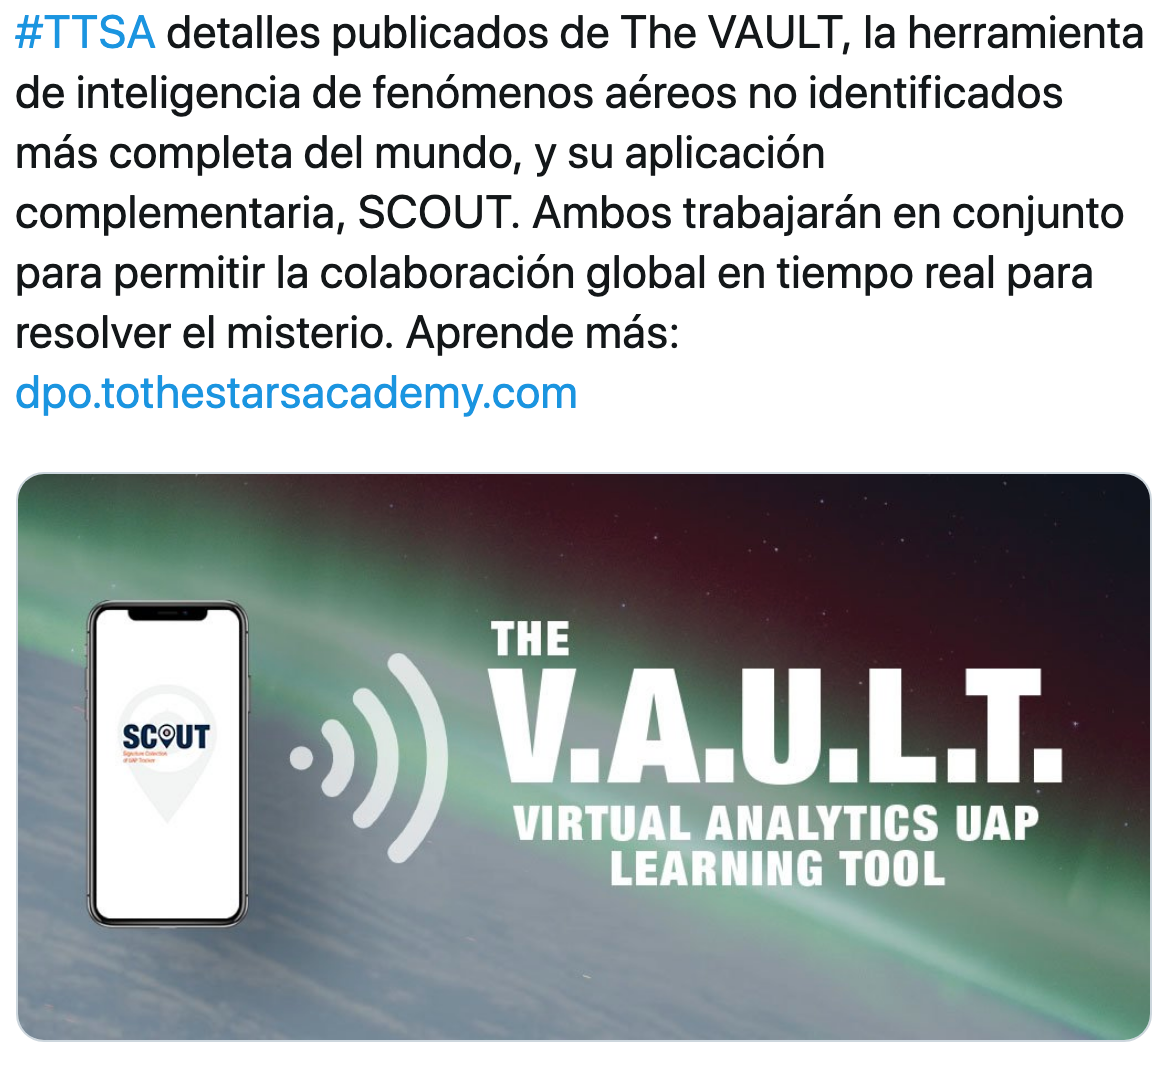 TTS Academy Releases Details For The VAULT, The World's Most Comprehensive  UAP Intelligence Tool | by Galán Vázquez | Medium